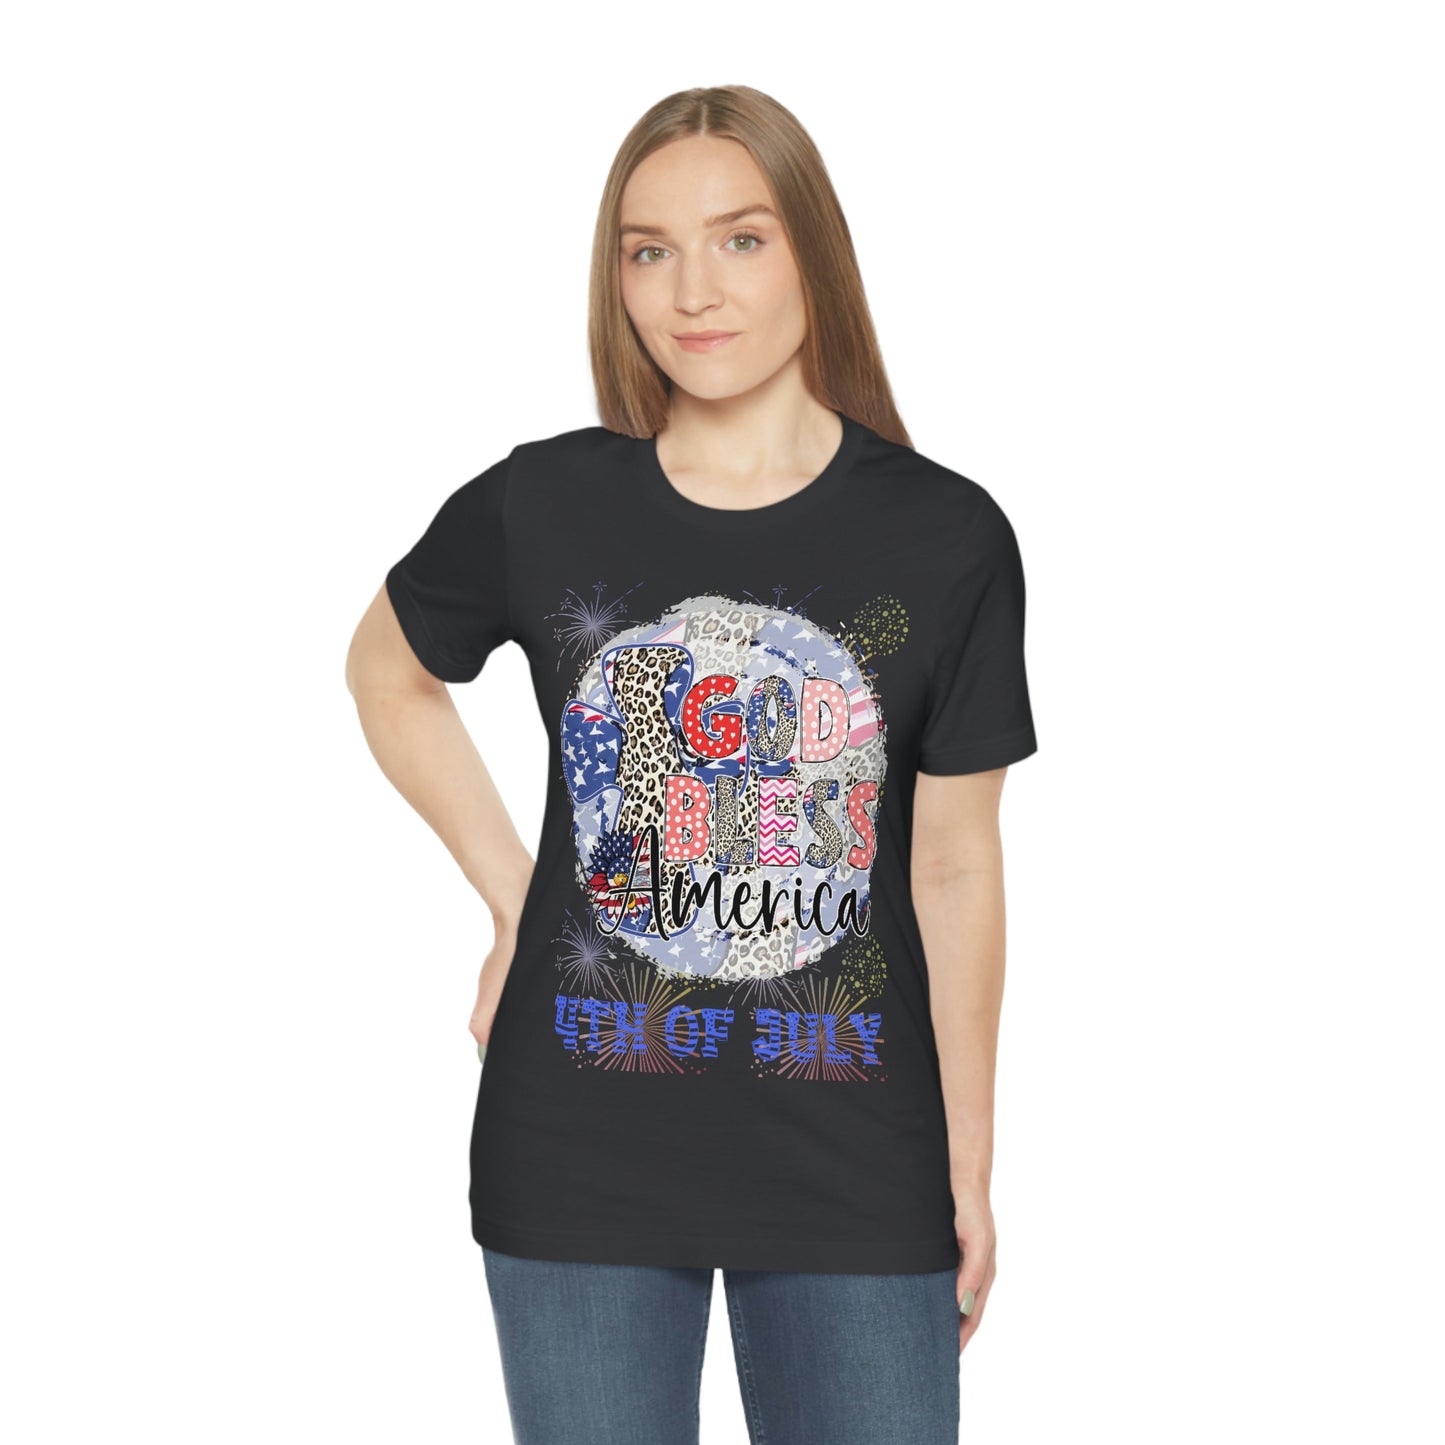 4th of July, America's Day, USA, God Bless America, Short Sleeve Tee